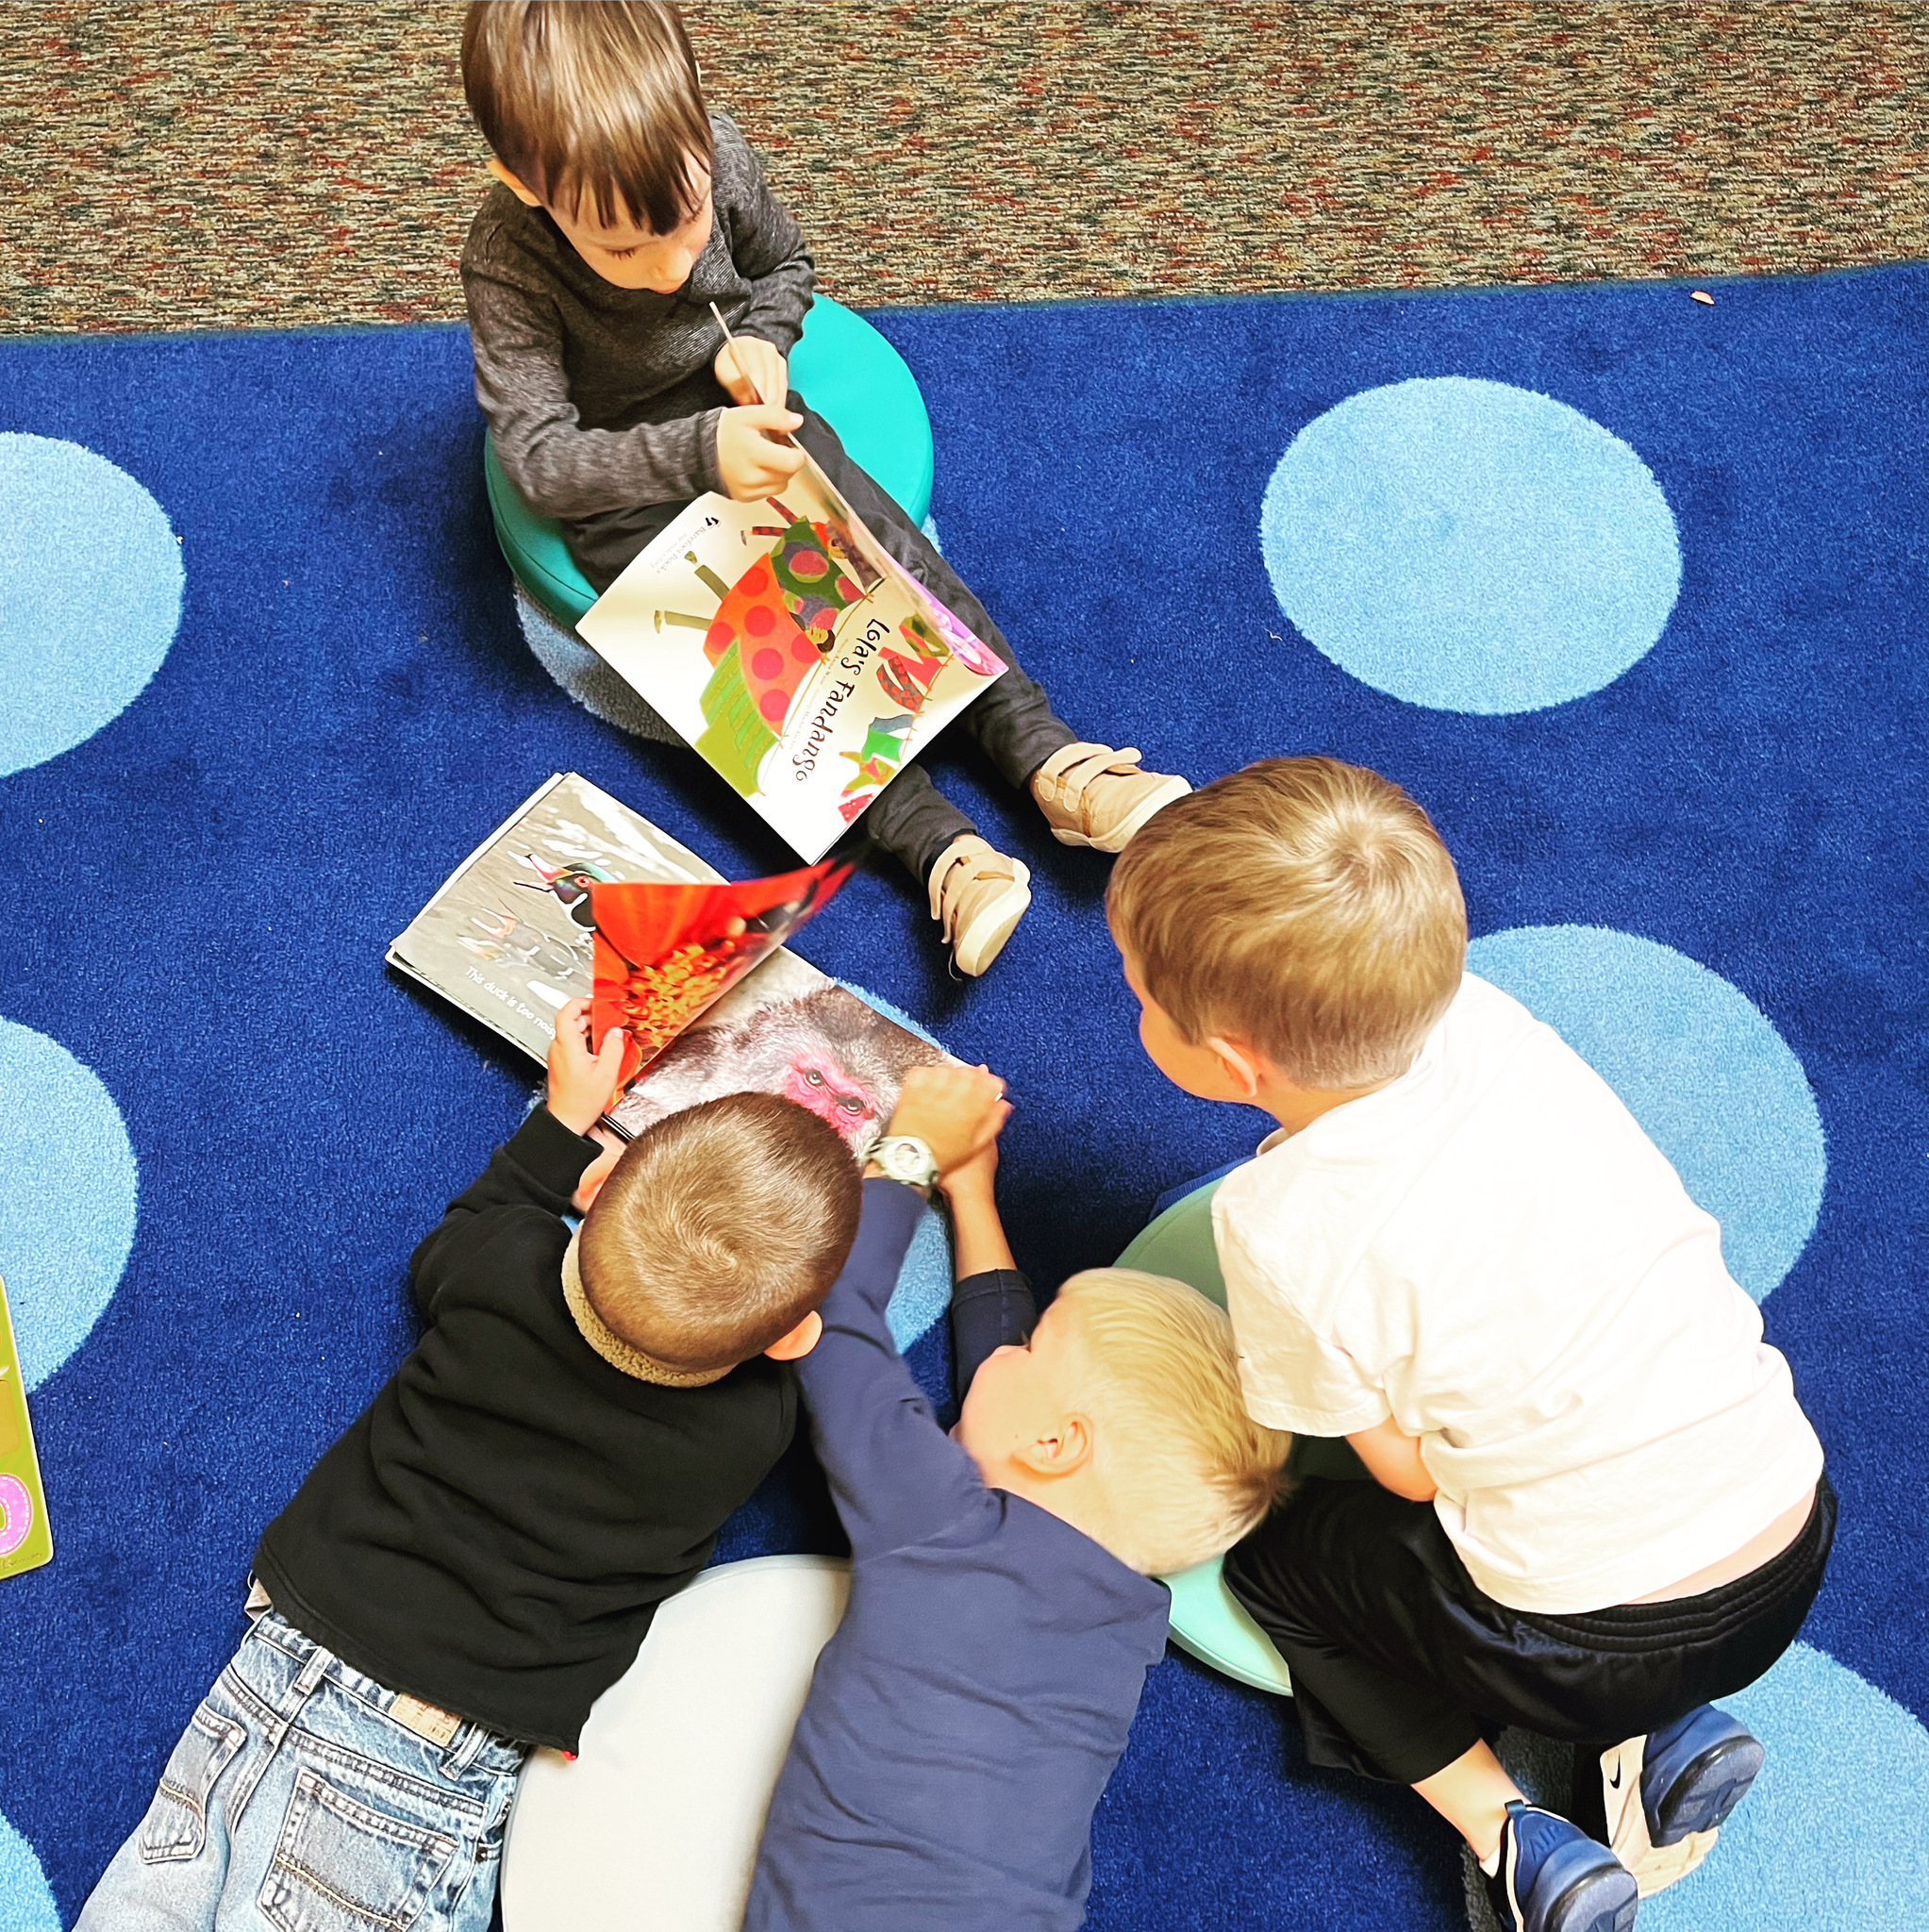 Decorative image of 4 preschool boys reading a book together.